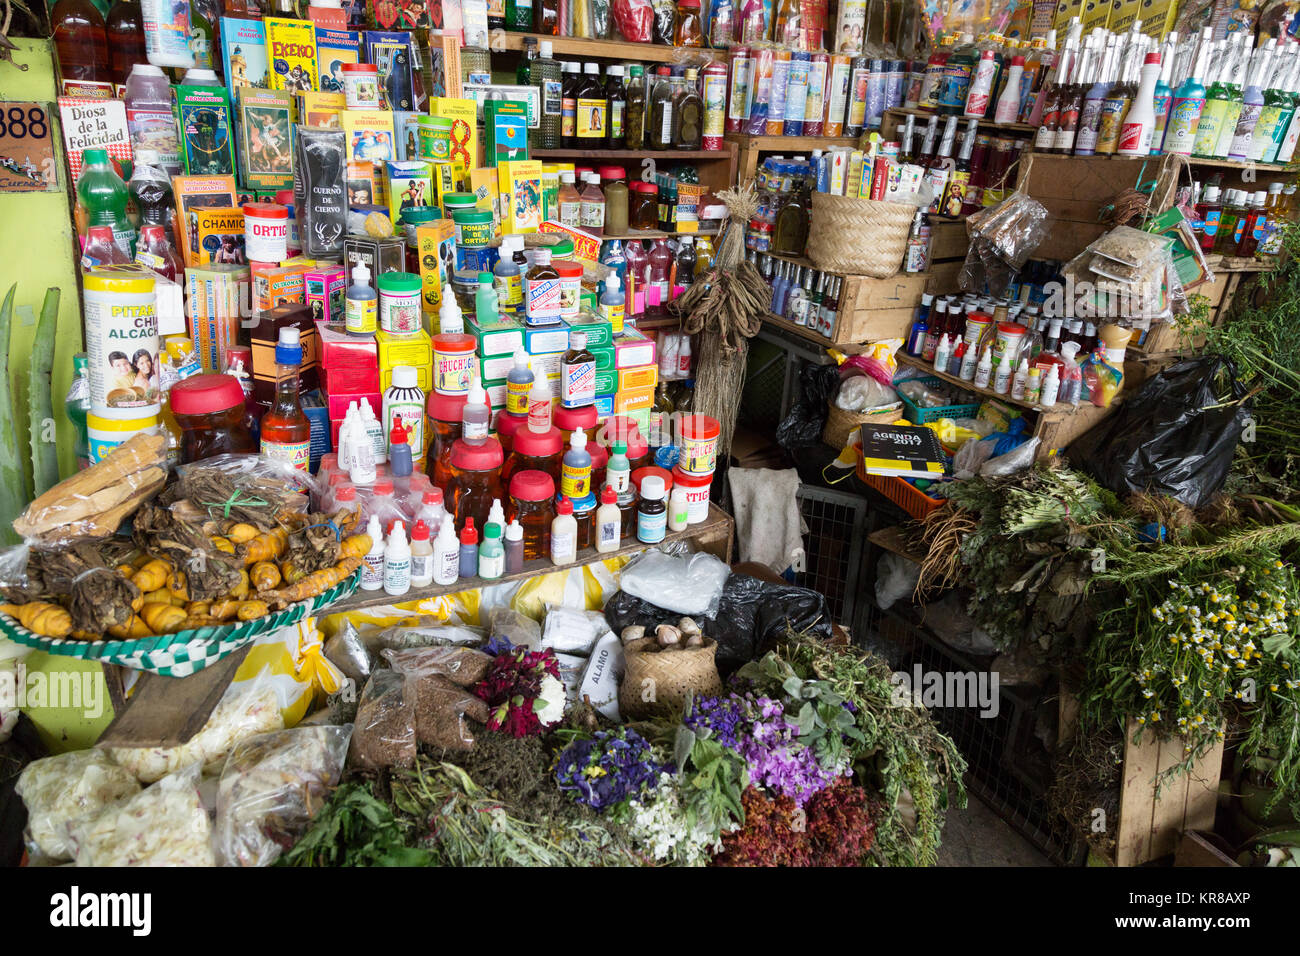 Medicinal plants and extracts for natural healing medications on sale, Cuenca market, Cuenca, Ecuador South America Stock Photo